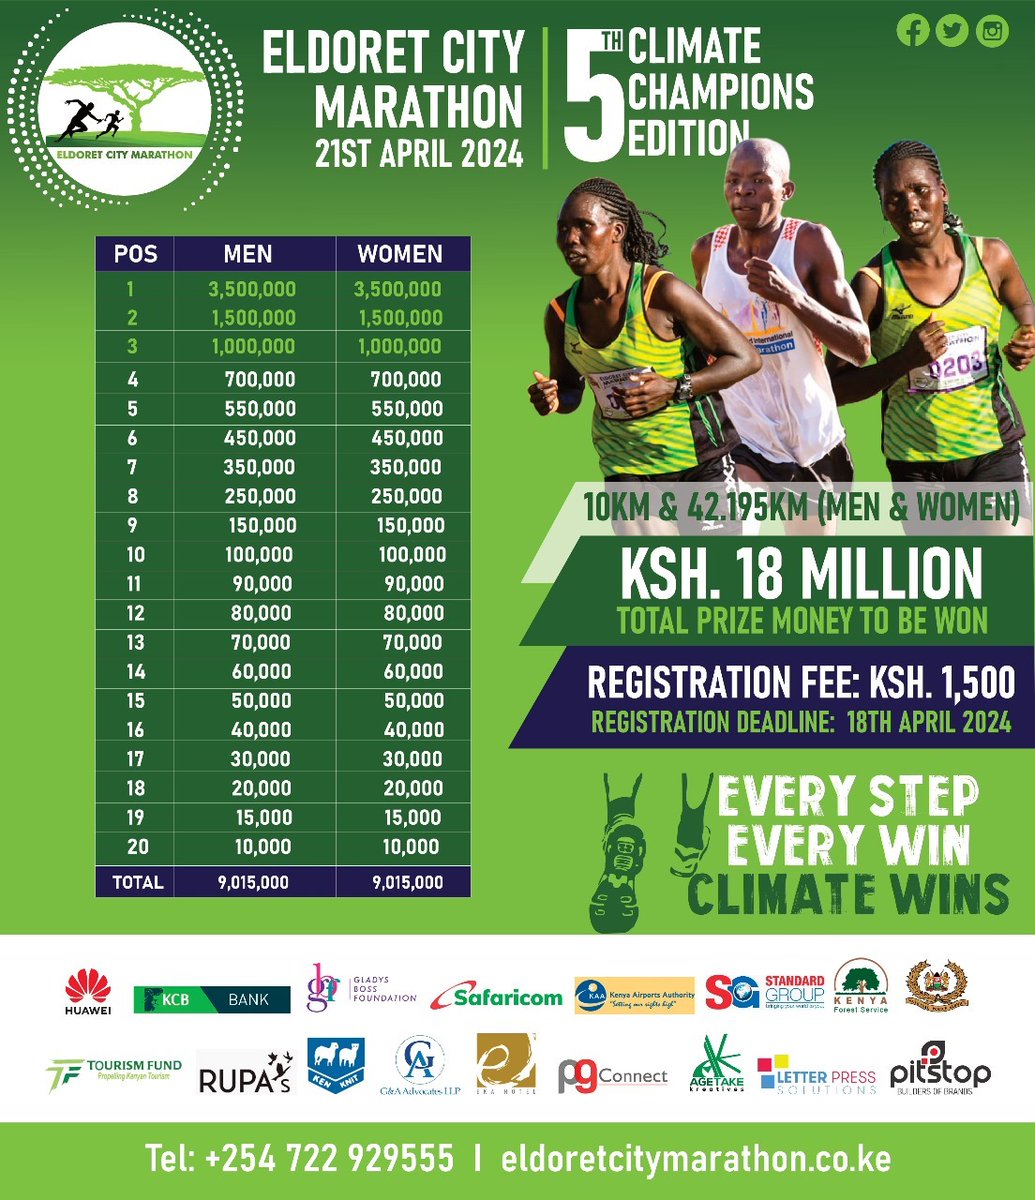 Every athlete has a story. Be a part of theirs by sponsoring and supporting their commitment to tree planting at #EldoretCityMarathon Adopt An Athlete Hon Gladys Shollei @e_citymarathon @GladysShollei